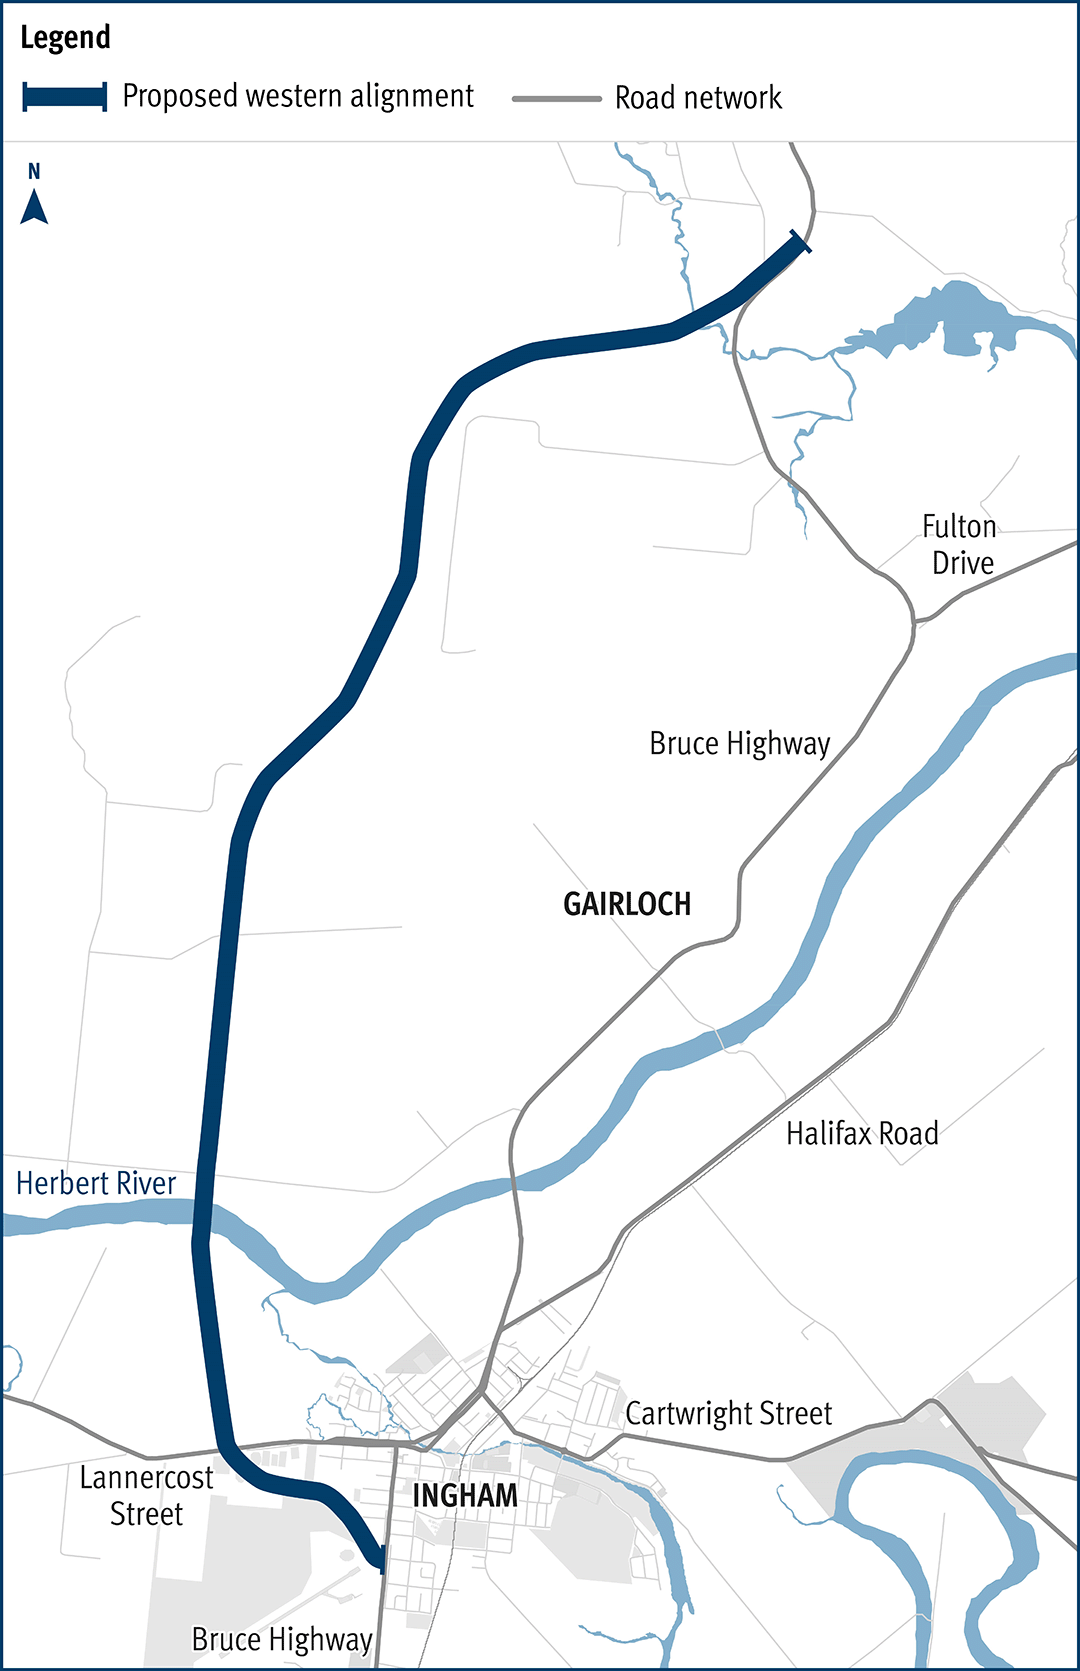 The map shows the locality of the existing Bruce Highway, from south of Ingham, north through the Gairloch floodway and up to the Cardwell Range. Cardwell is northeast of the map. A solid dark blue line west of the Bruce Highway indicates the current proposed Ingham to Cardwell deviation project corridor. This is known as the Western 2A Deviation, which has been gazetted as future state-controlled road. The local road network, including Halifax Road and Lannercost Street are also highlighted on the map.